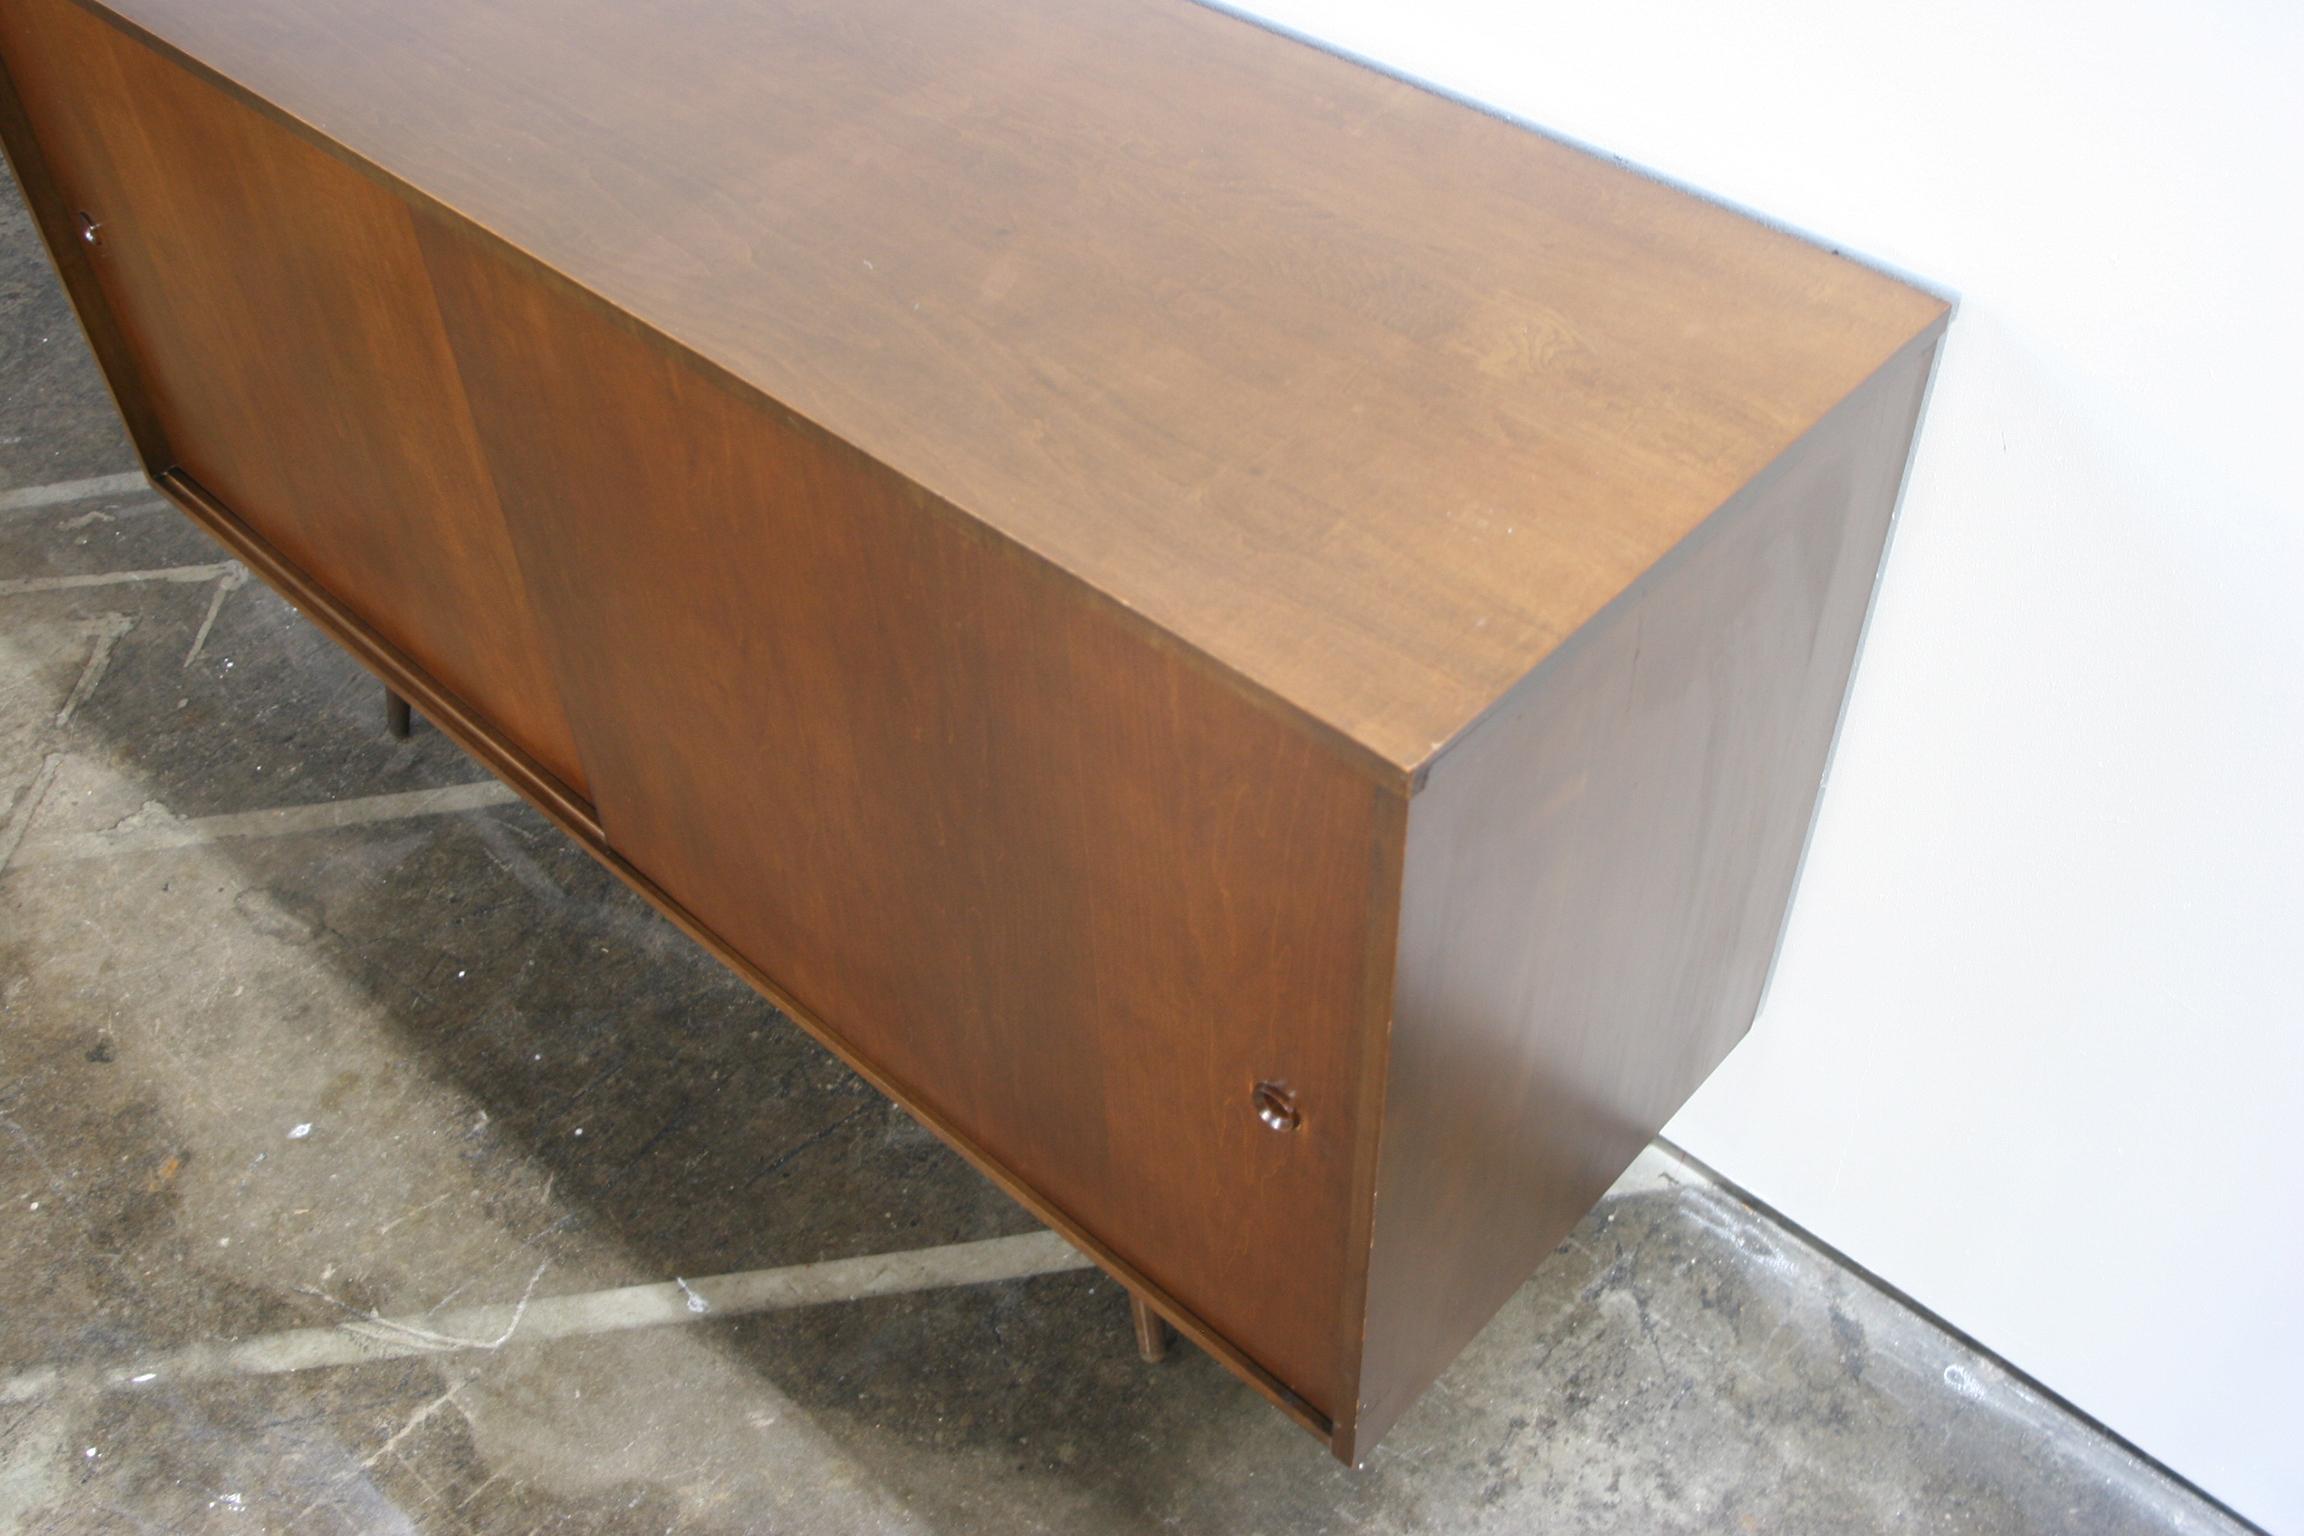 Midcentury Tall Credenza by Paul McCobb circa 1950 Planner Group #1514 Walnut 3